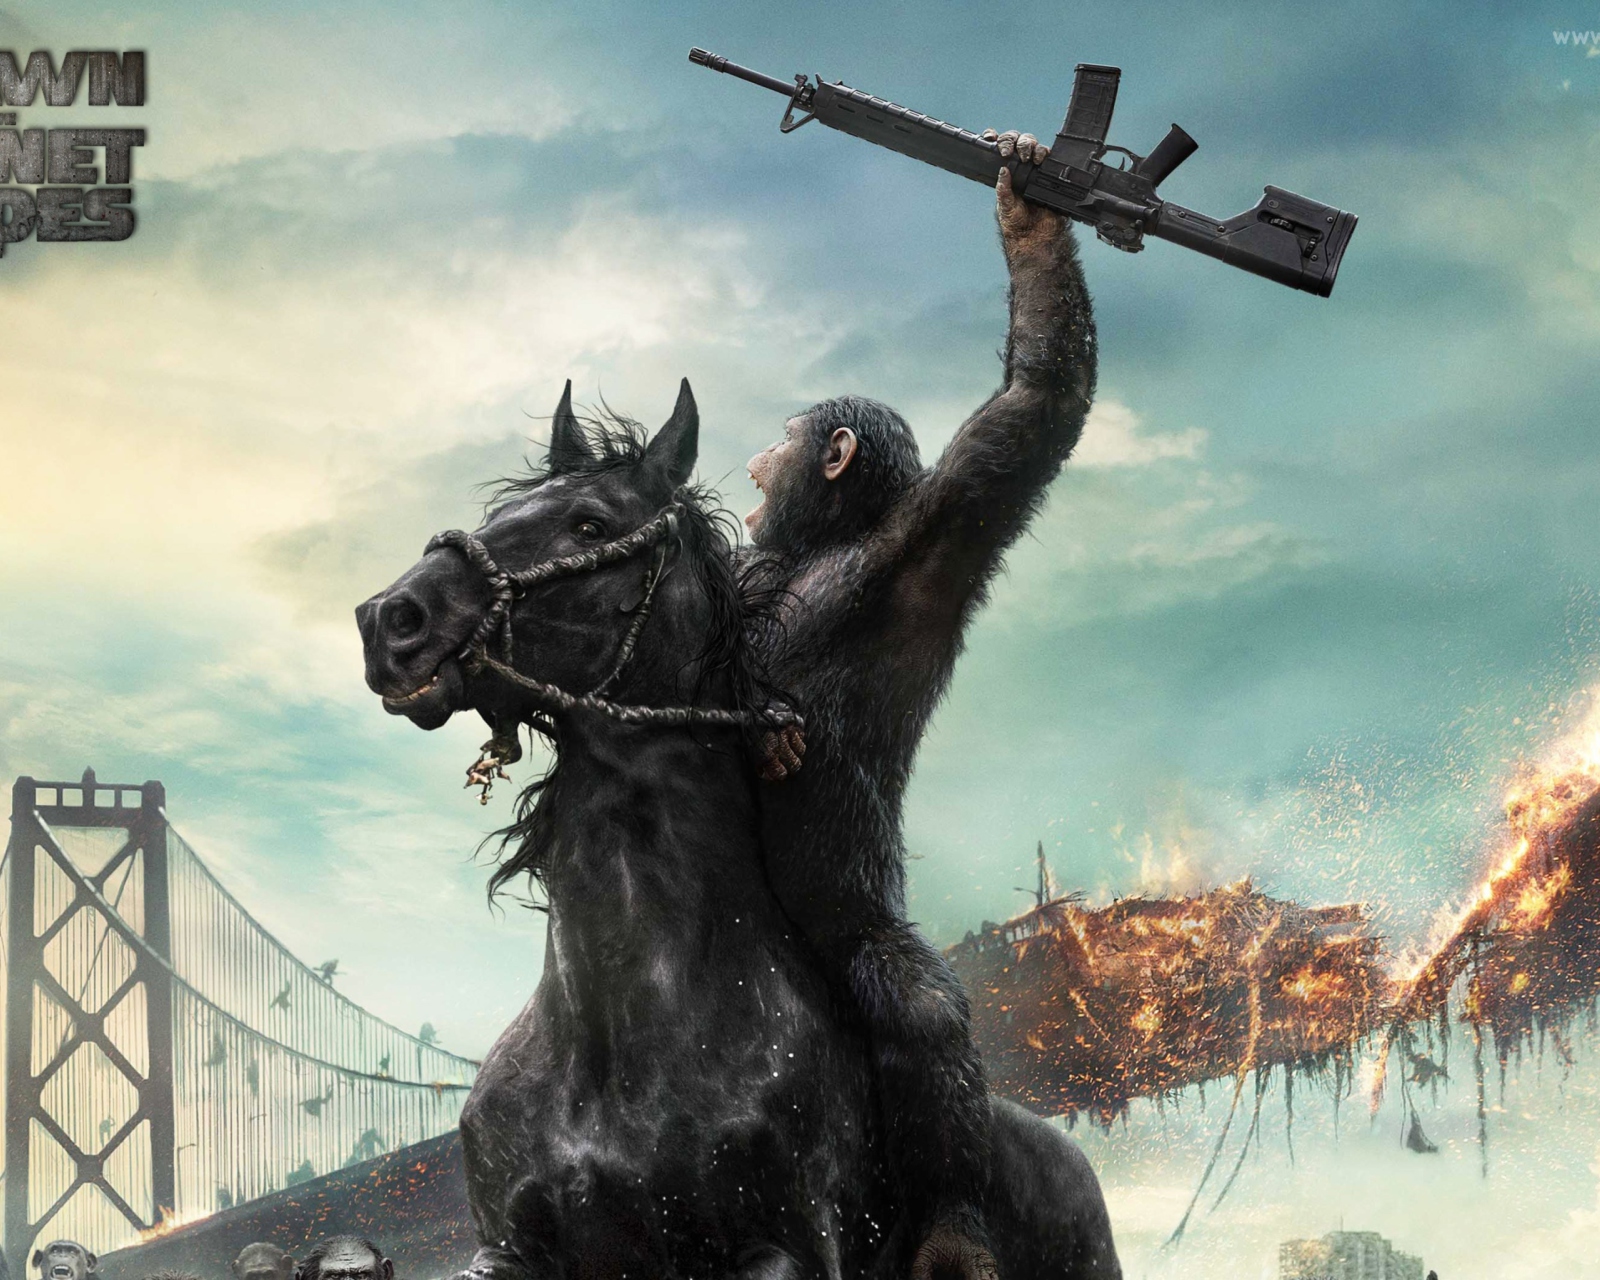 Dawn Of The Planet Of The Apes Movie screenshot #1 1600x1280